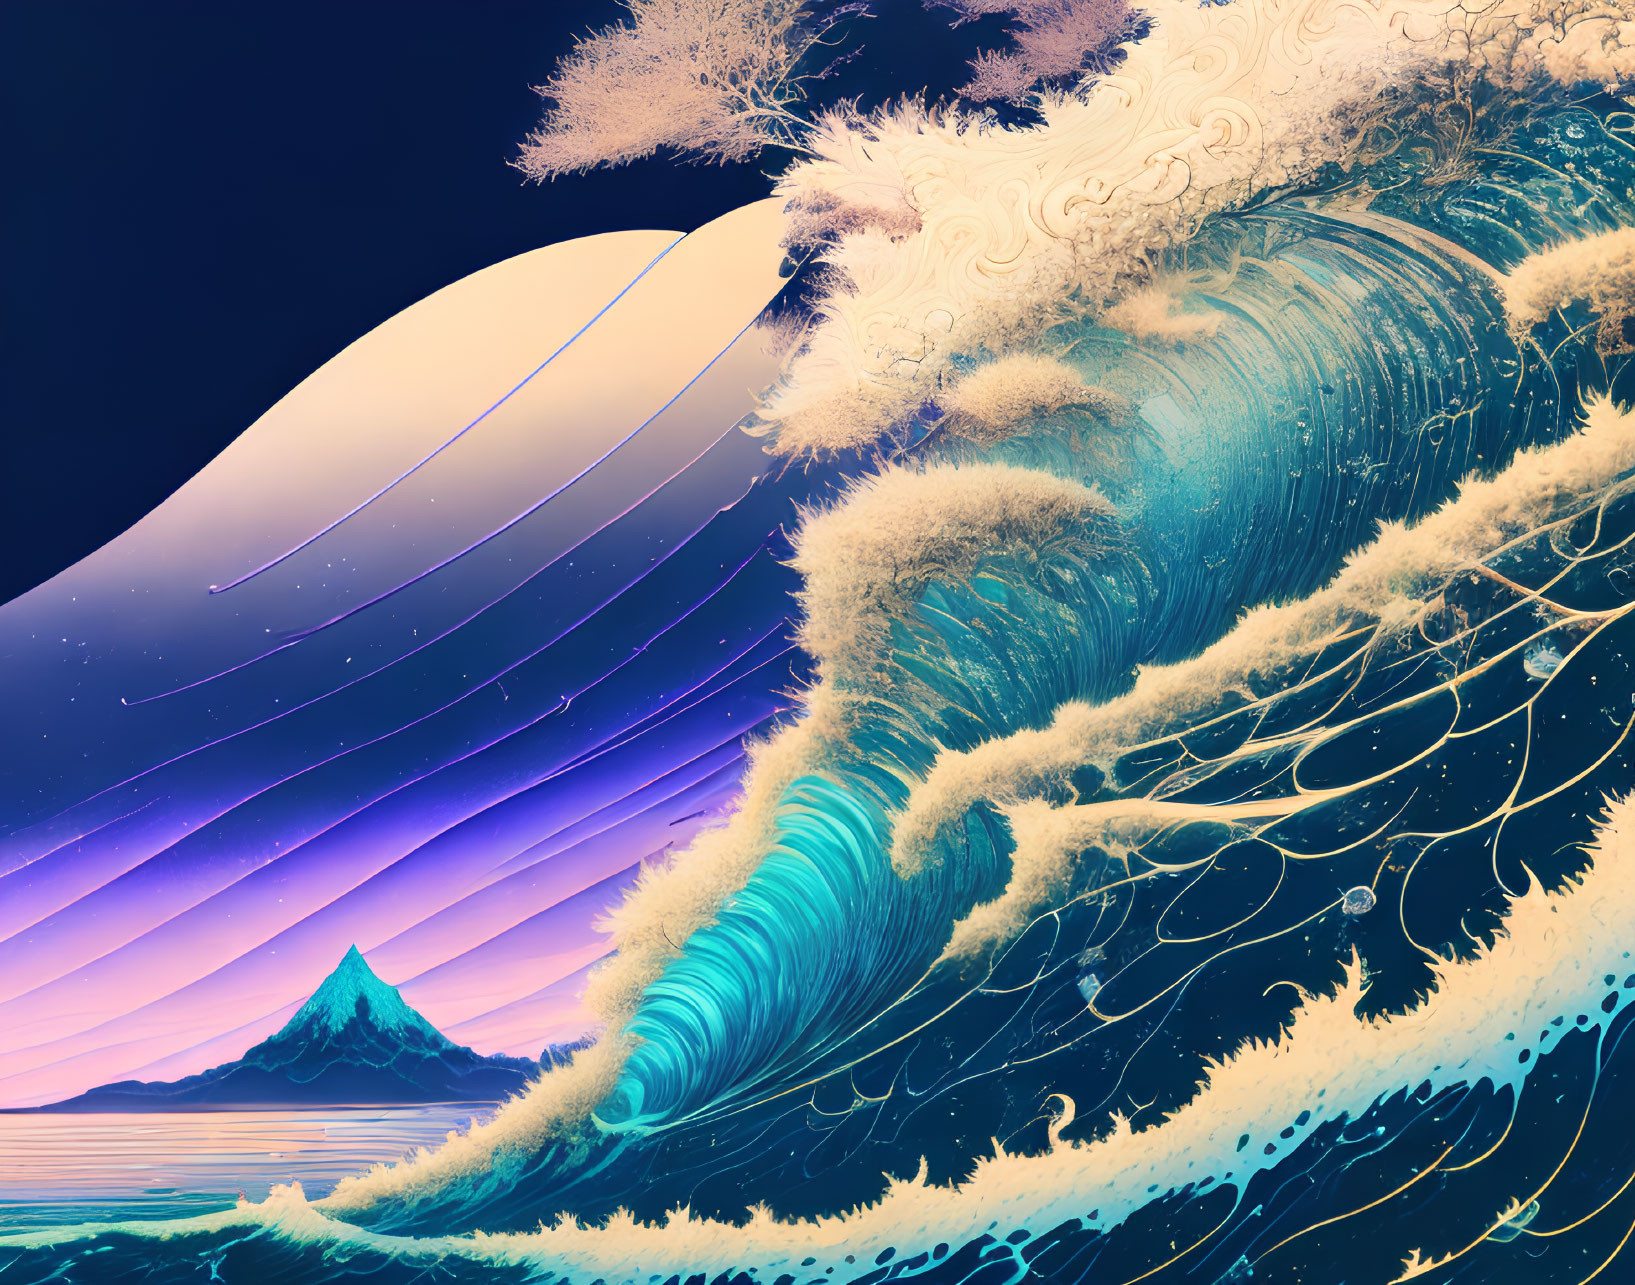 Stylized illustration of towering wave against starry night sky